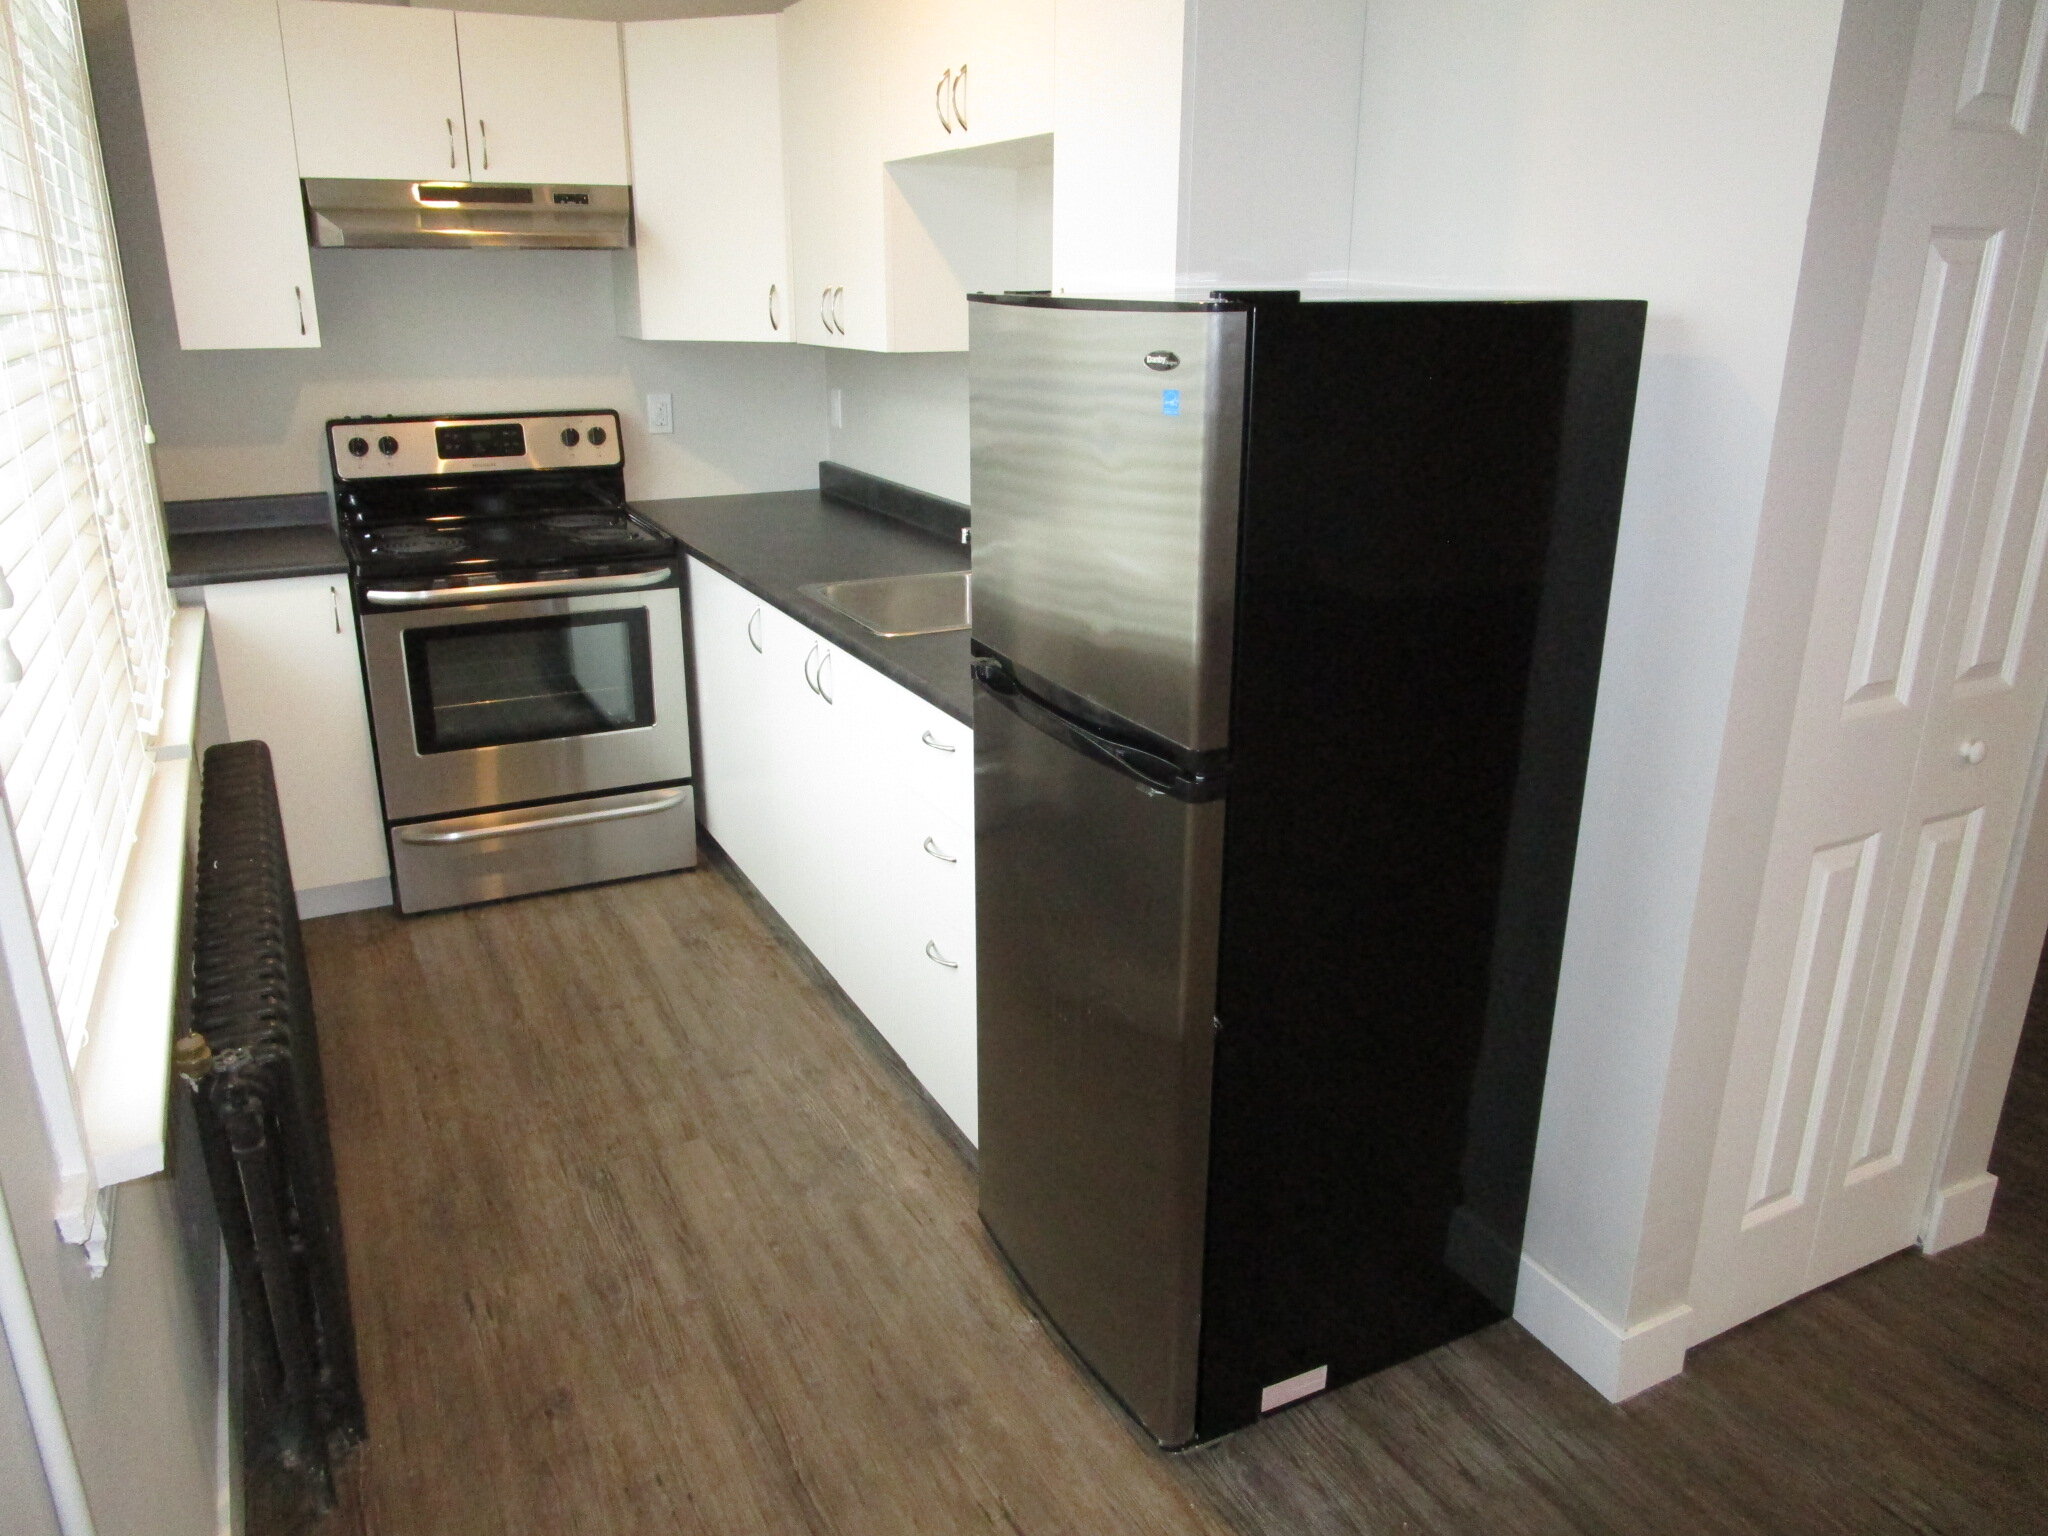 1205 3rd Ave, Prince George - Updated Kitchen.jpg